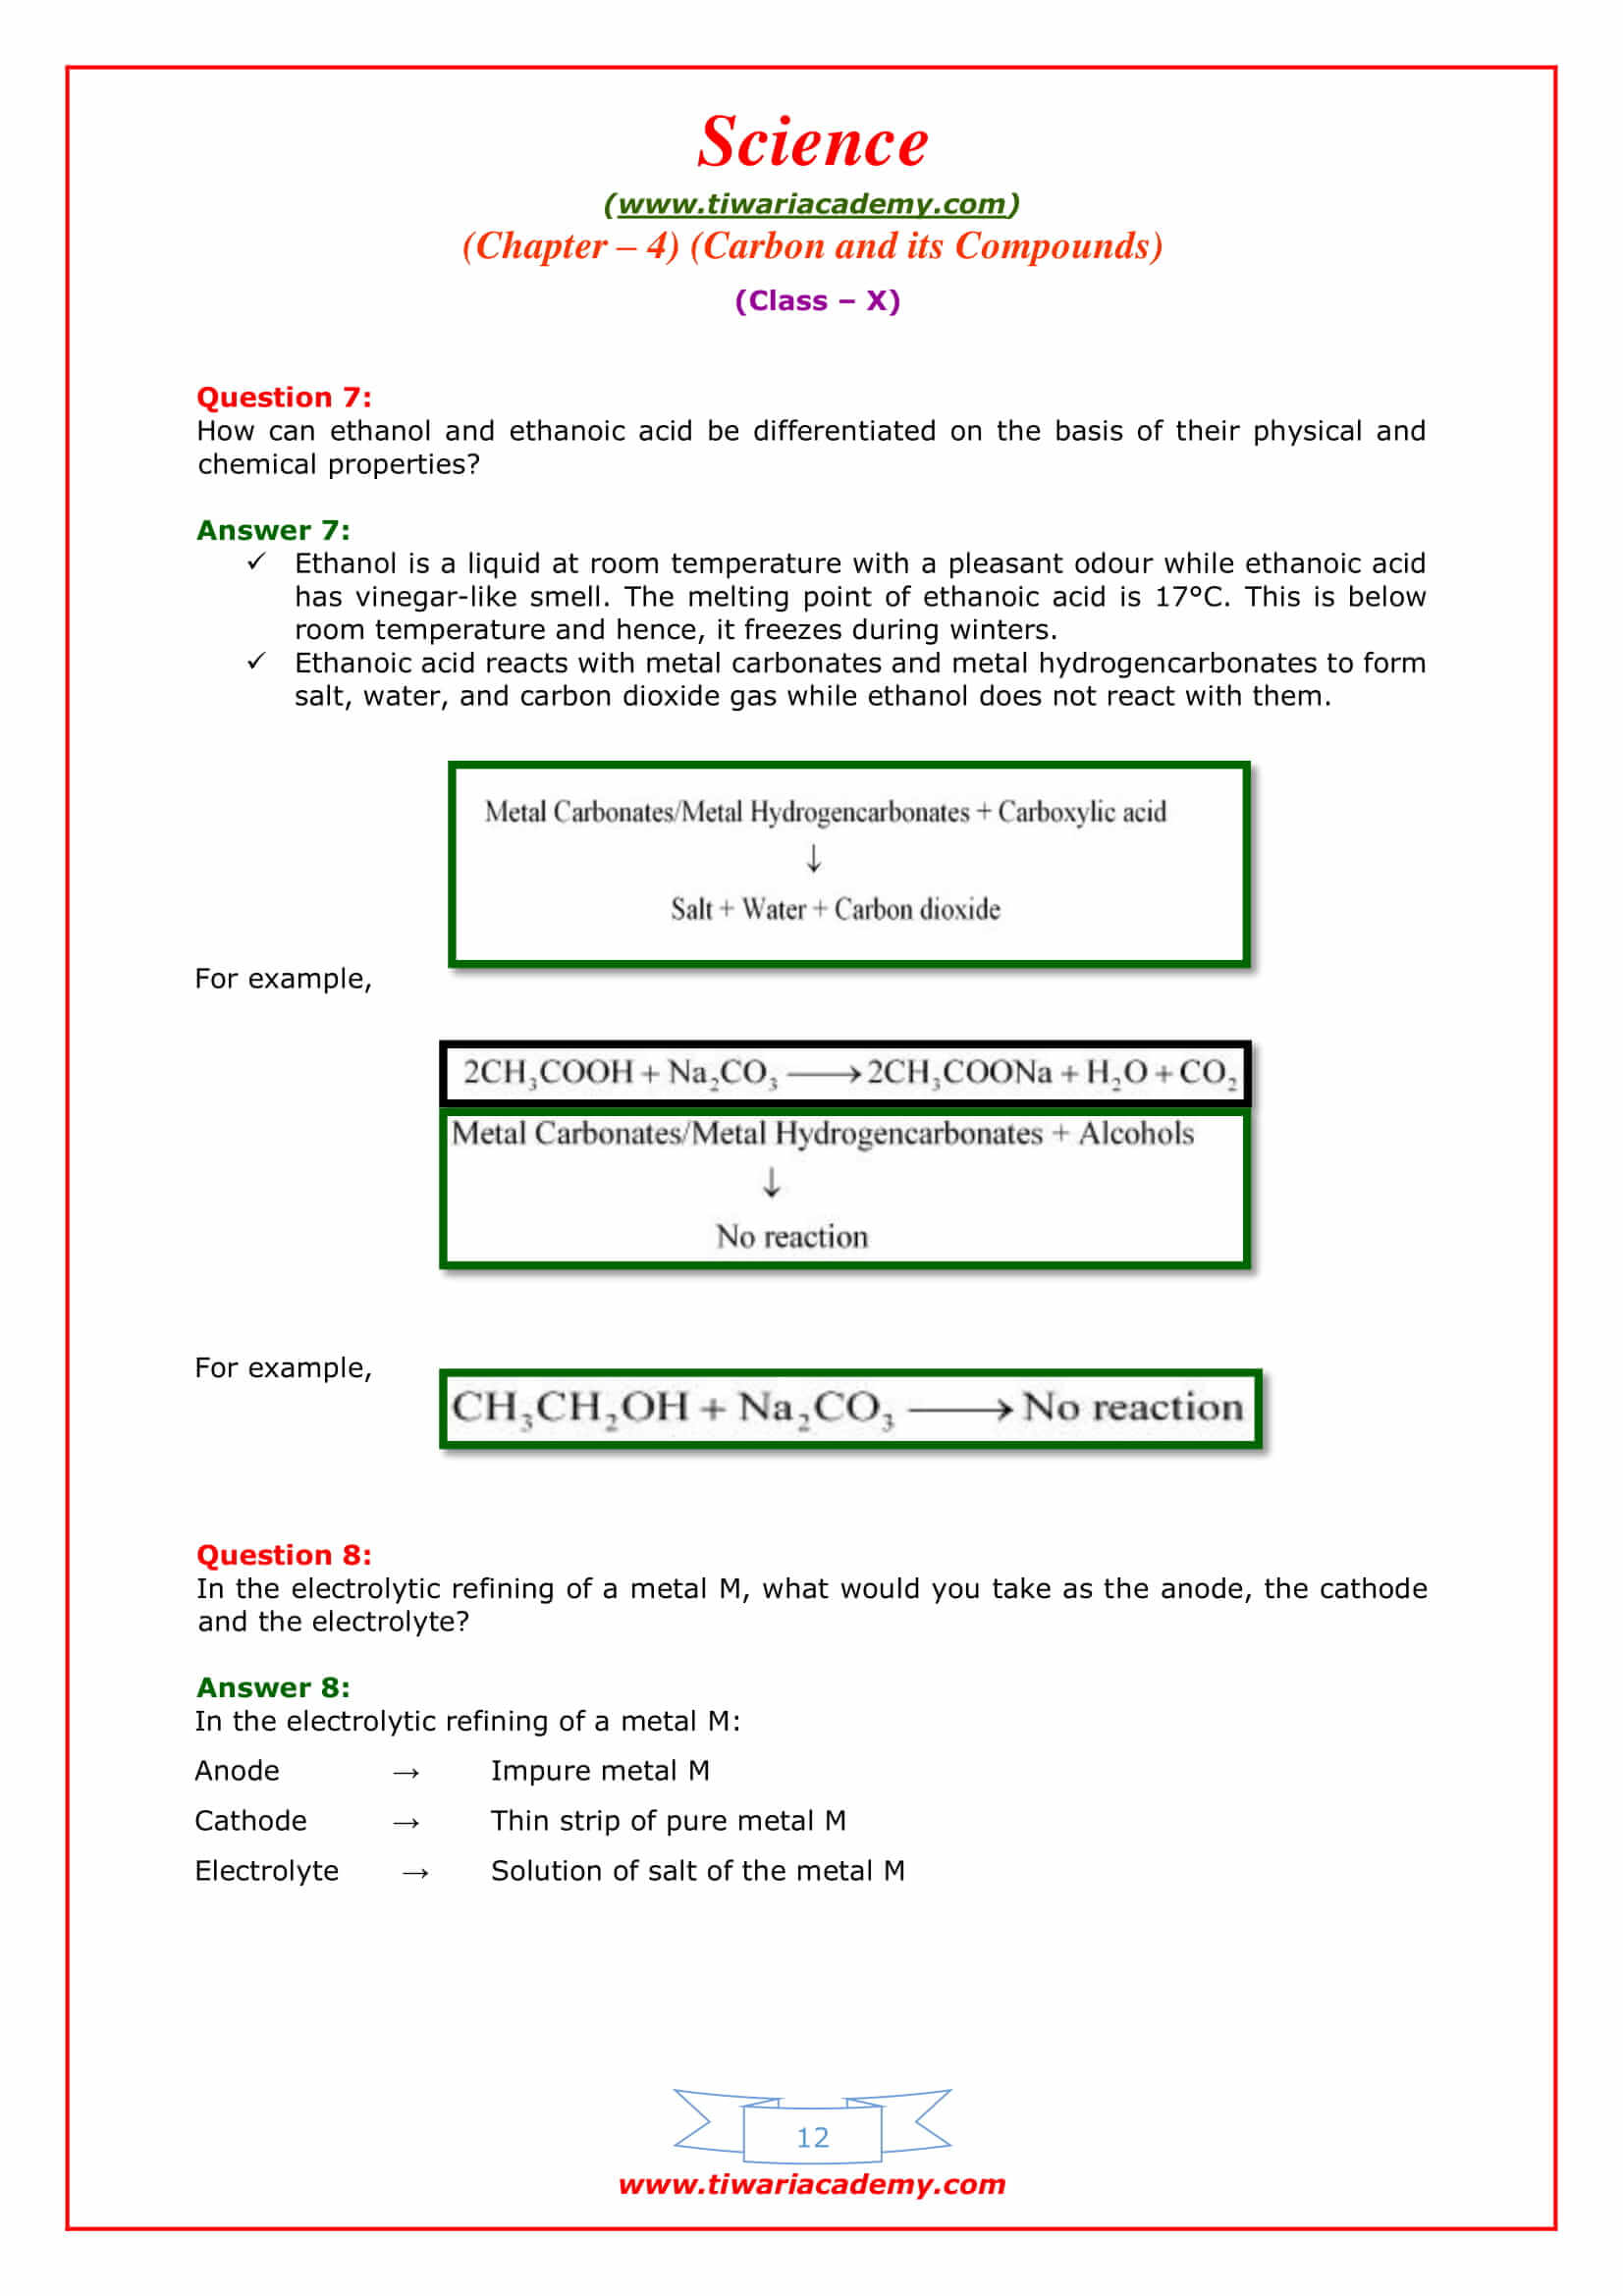 NCERT Solutions for Class 10 Science Chapter 4 Carbon and its compounds Exercises for mp board